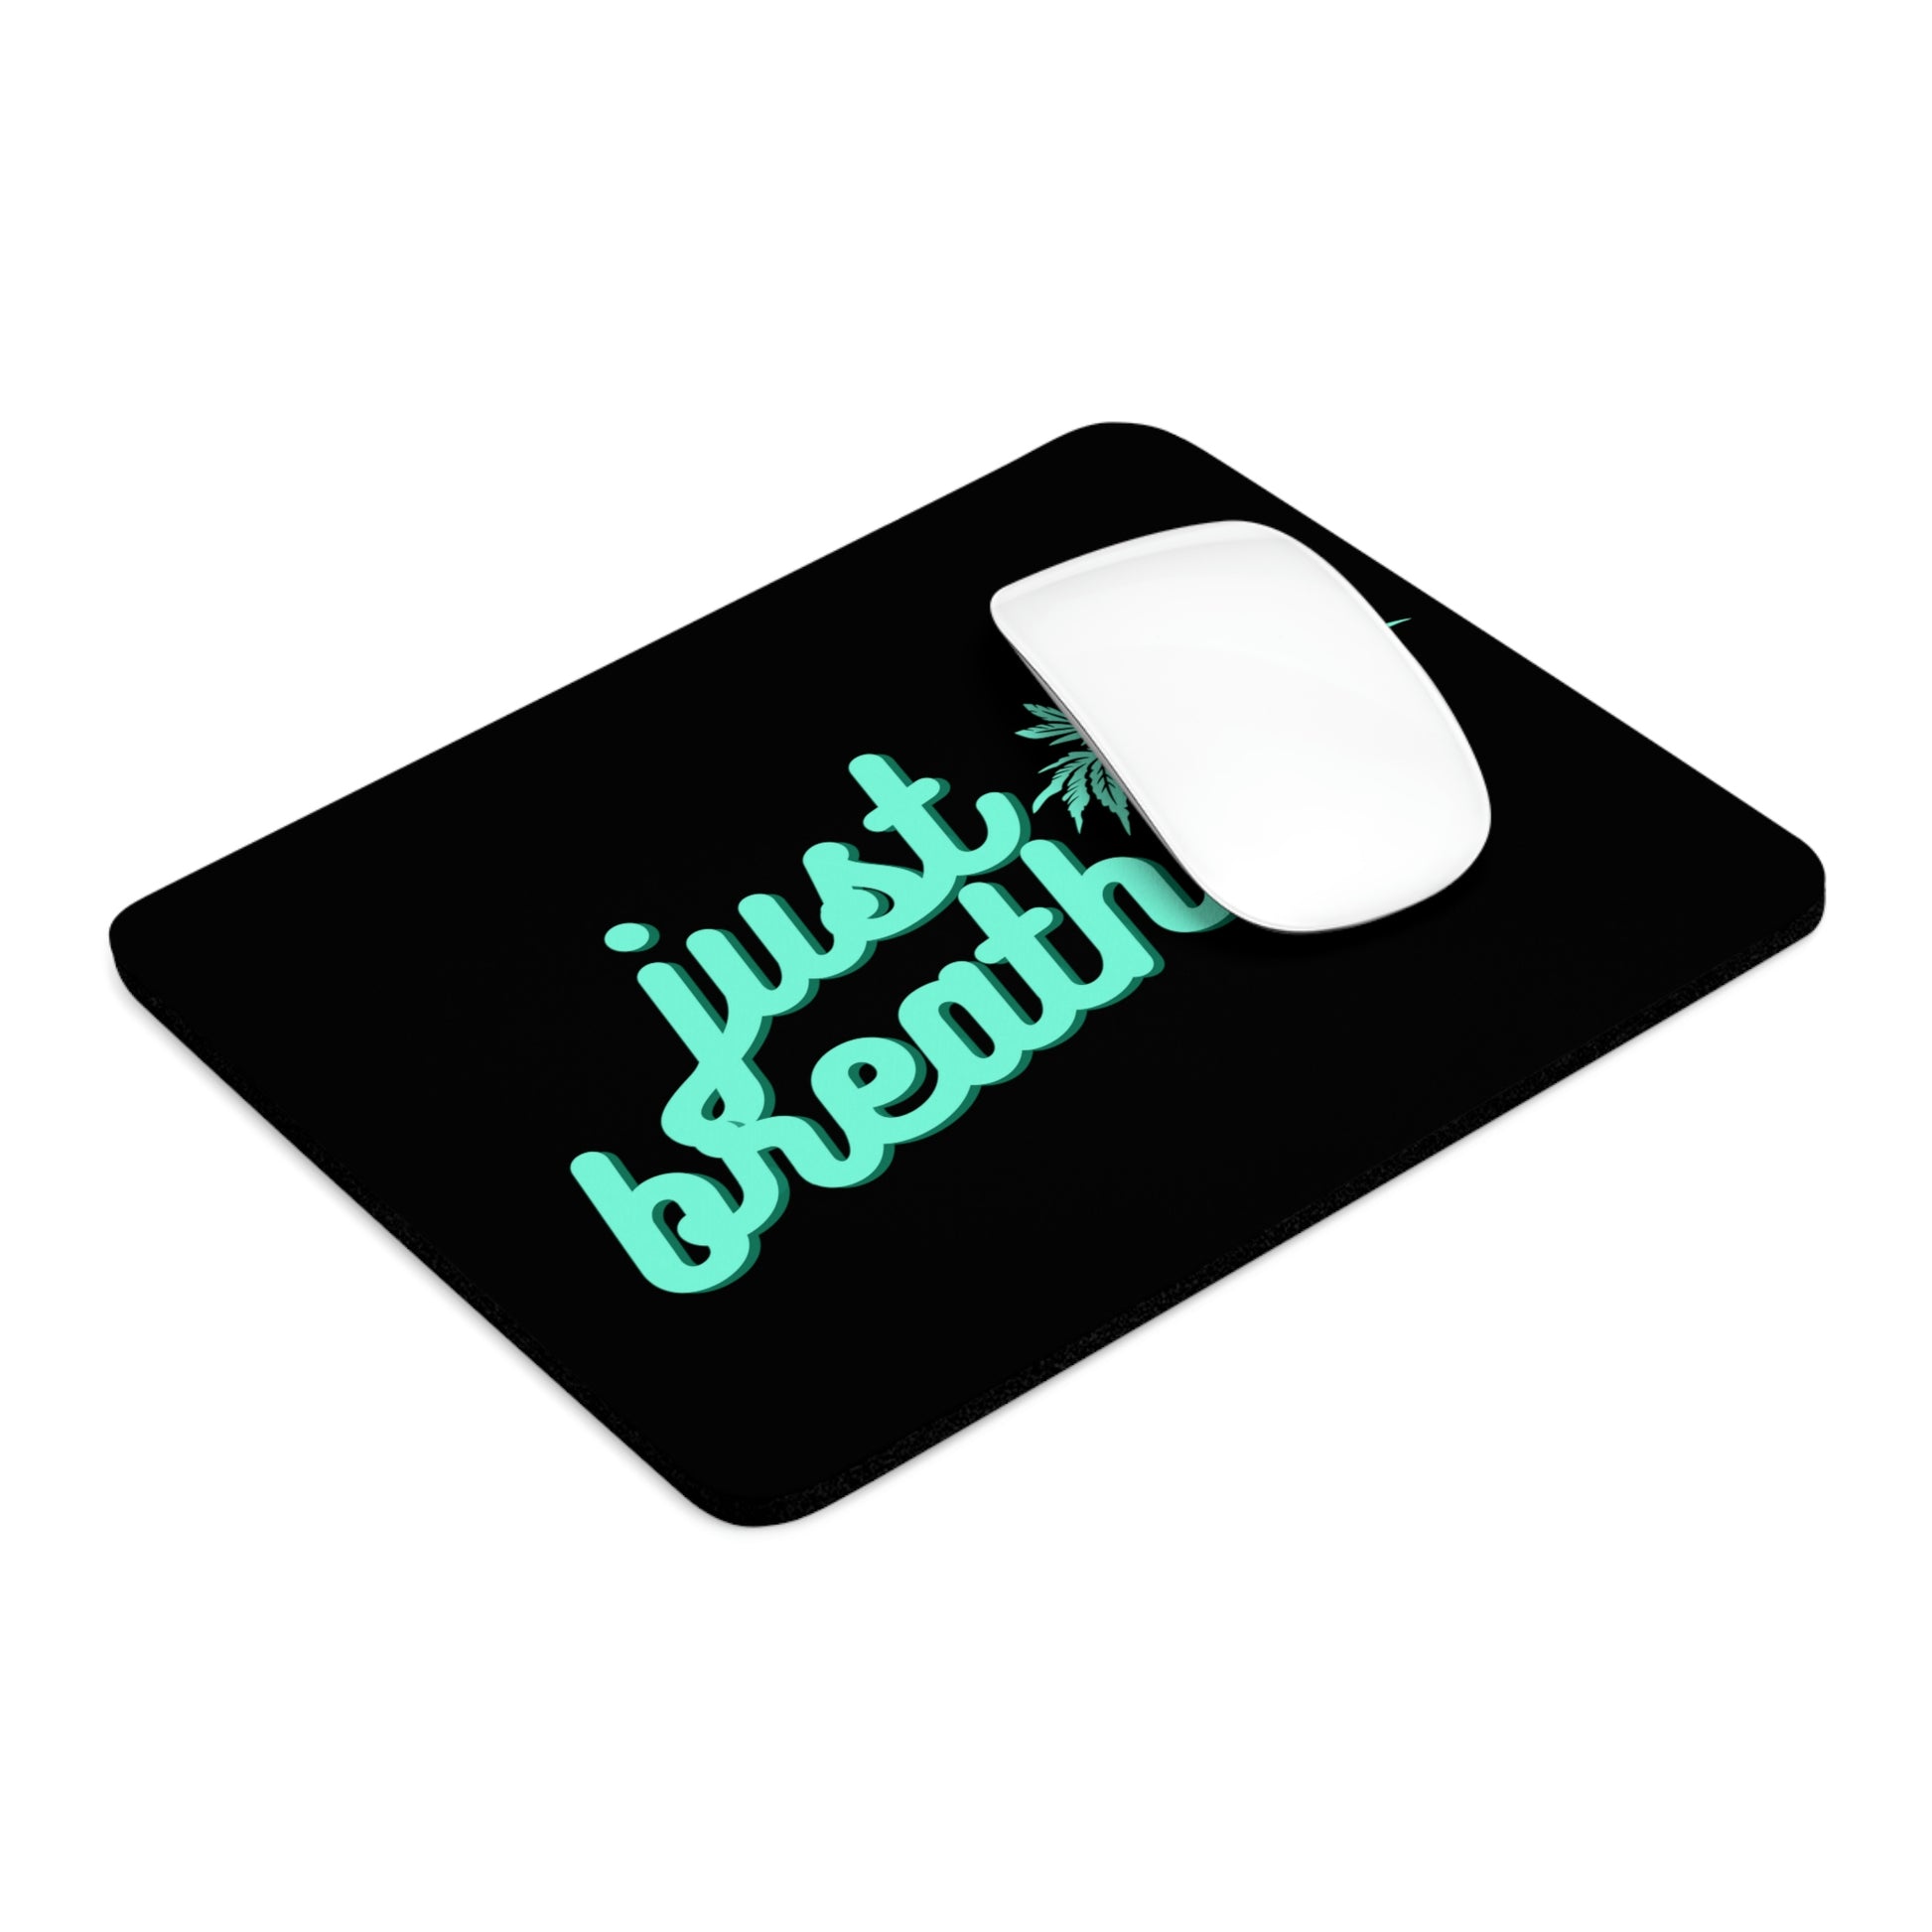 A white computer mouse on a Just Breathe Cannabis black mouse pad with the turquoise text "just breathe.